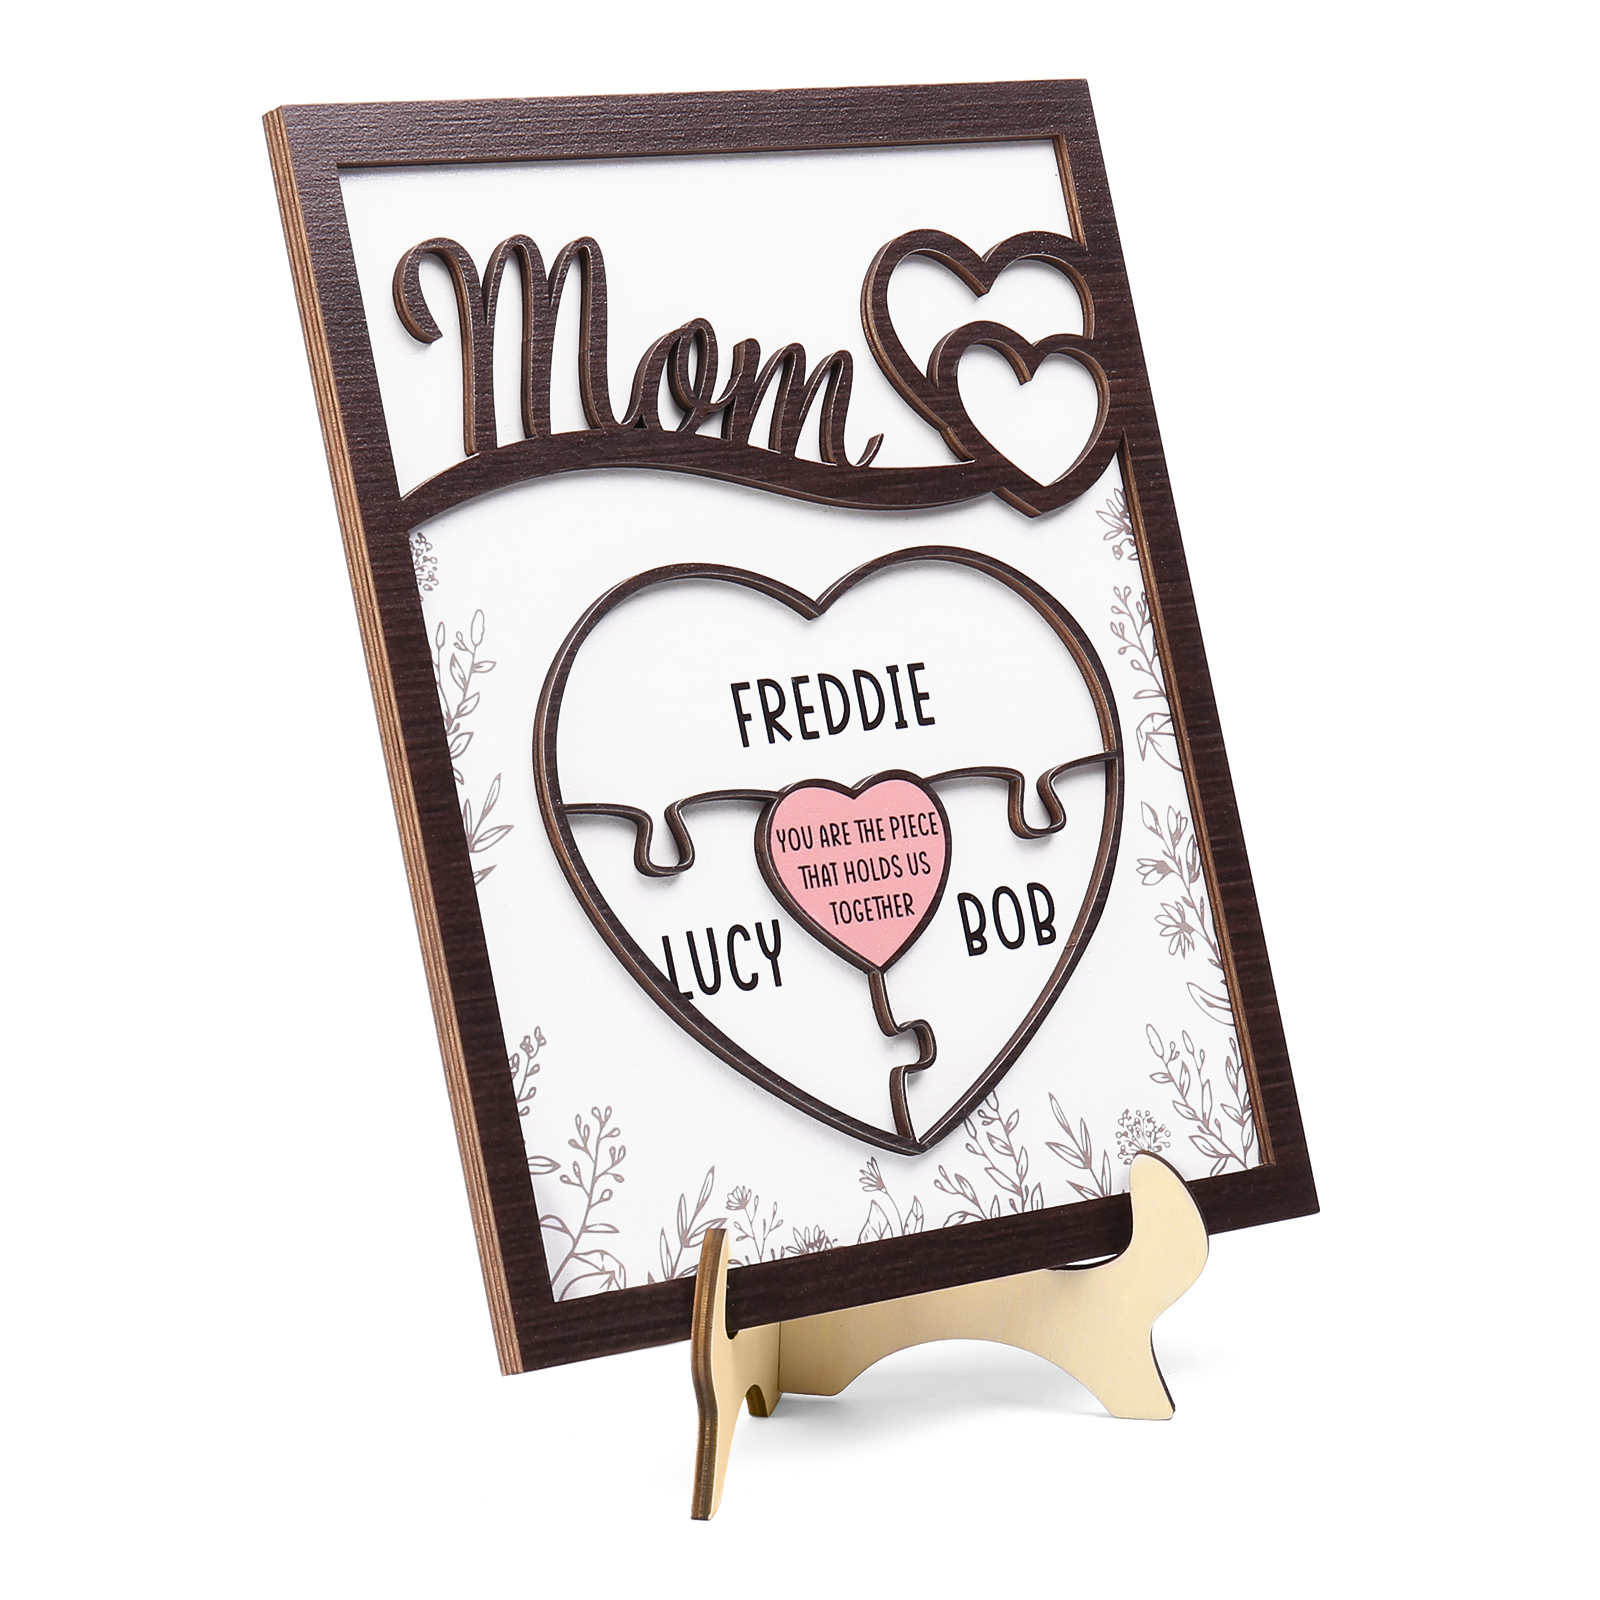 3 Names - Personalized Home Frame Wooden Decoration Customizable with 2 Texts, Love Pieces Wooden Board Painting for Mom